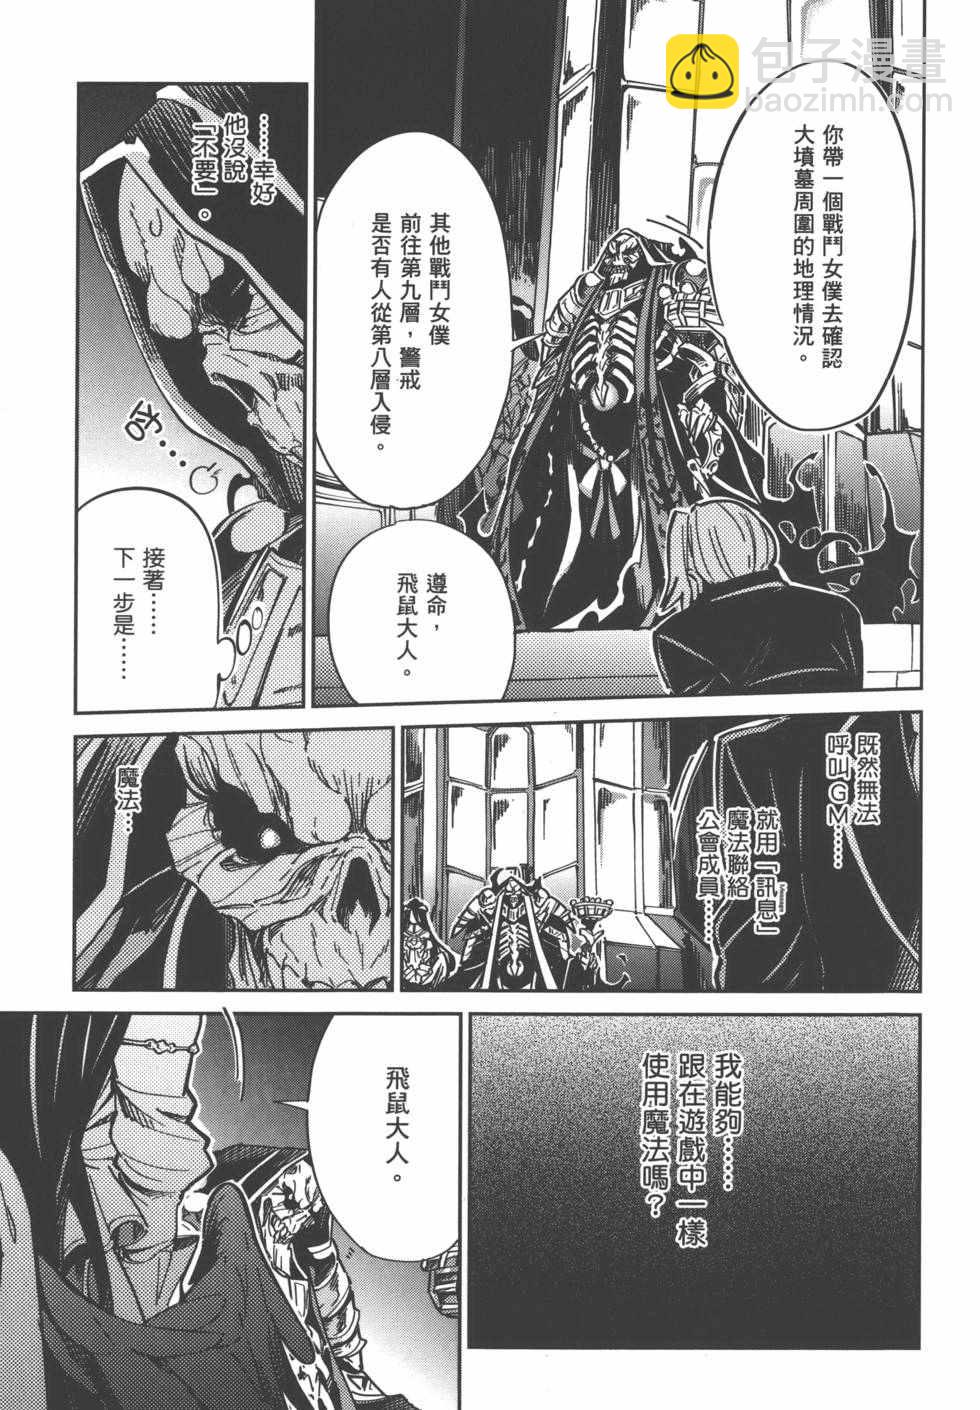 OVERLORD - 第1卷(1/4) - 3